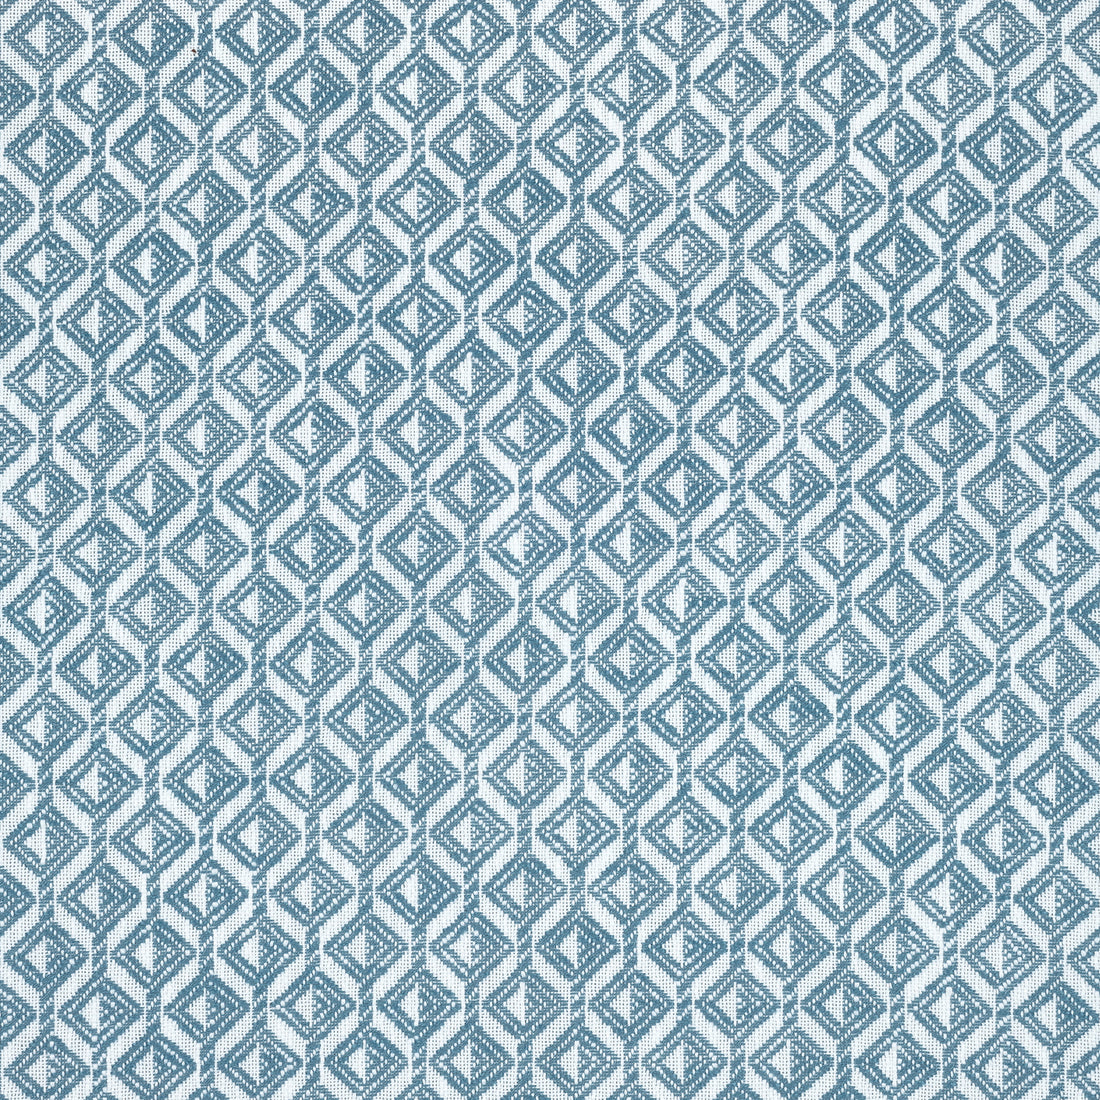 Trion fabric in cadet color - pattern number W73460 - by Thibaut in the Landmark collection